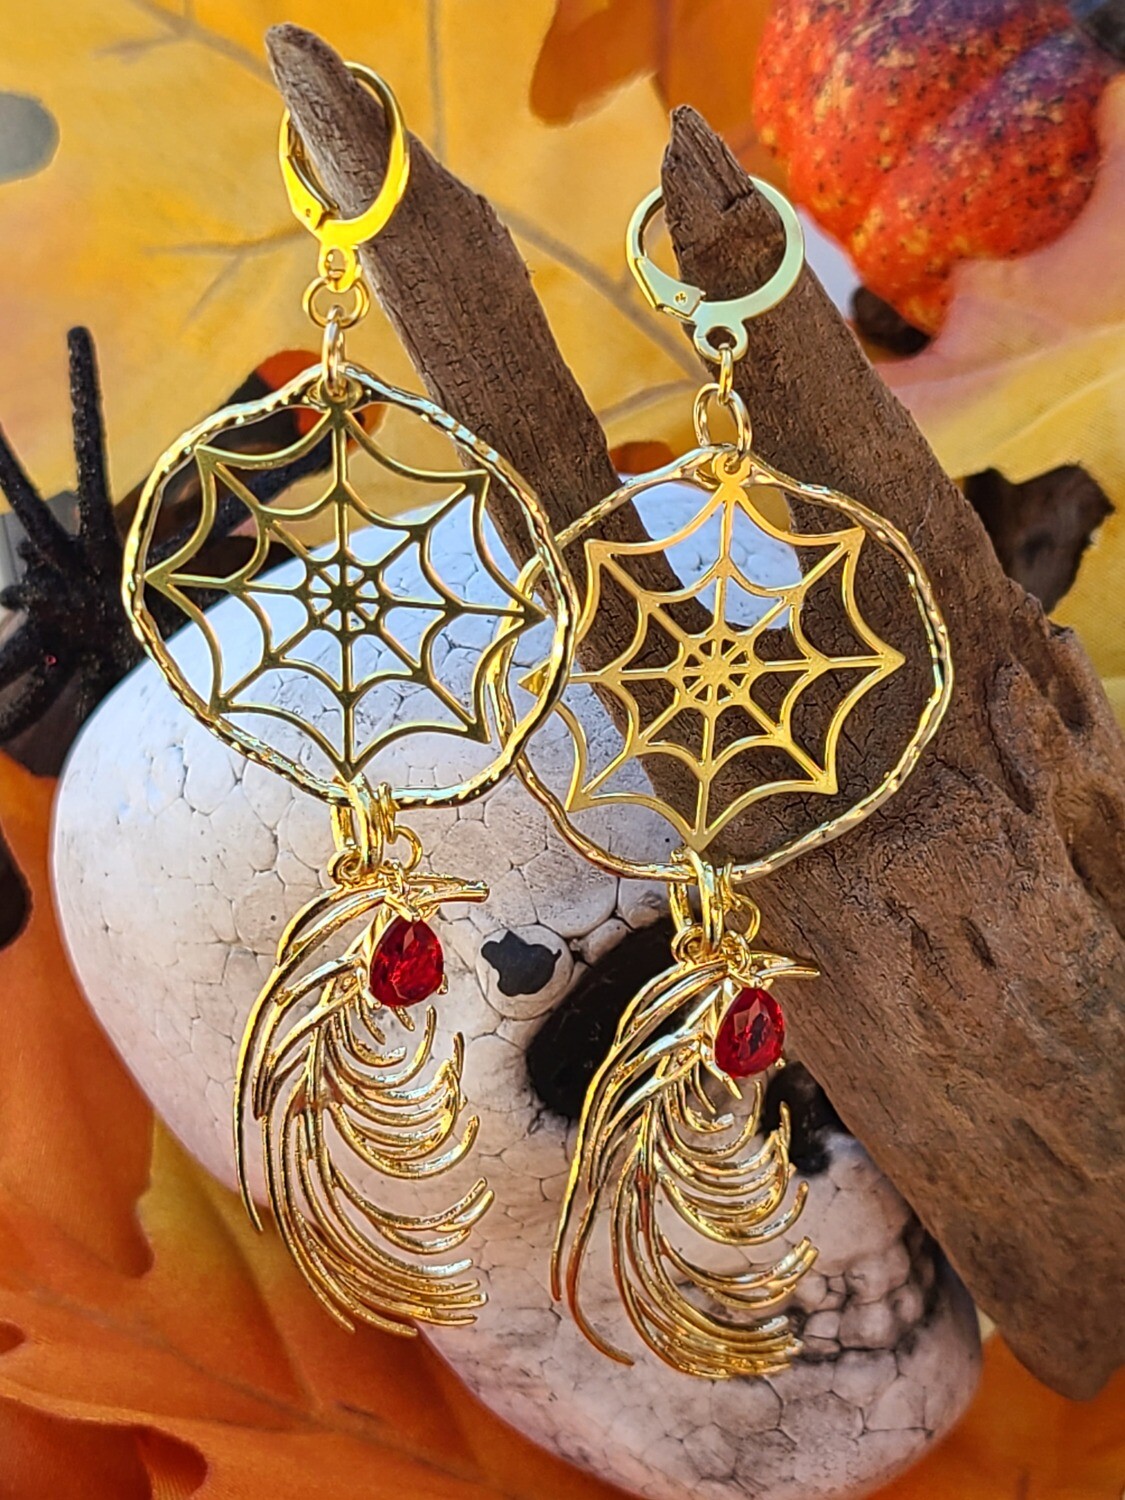 Gold-tone spiderwebs with red gems